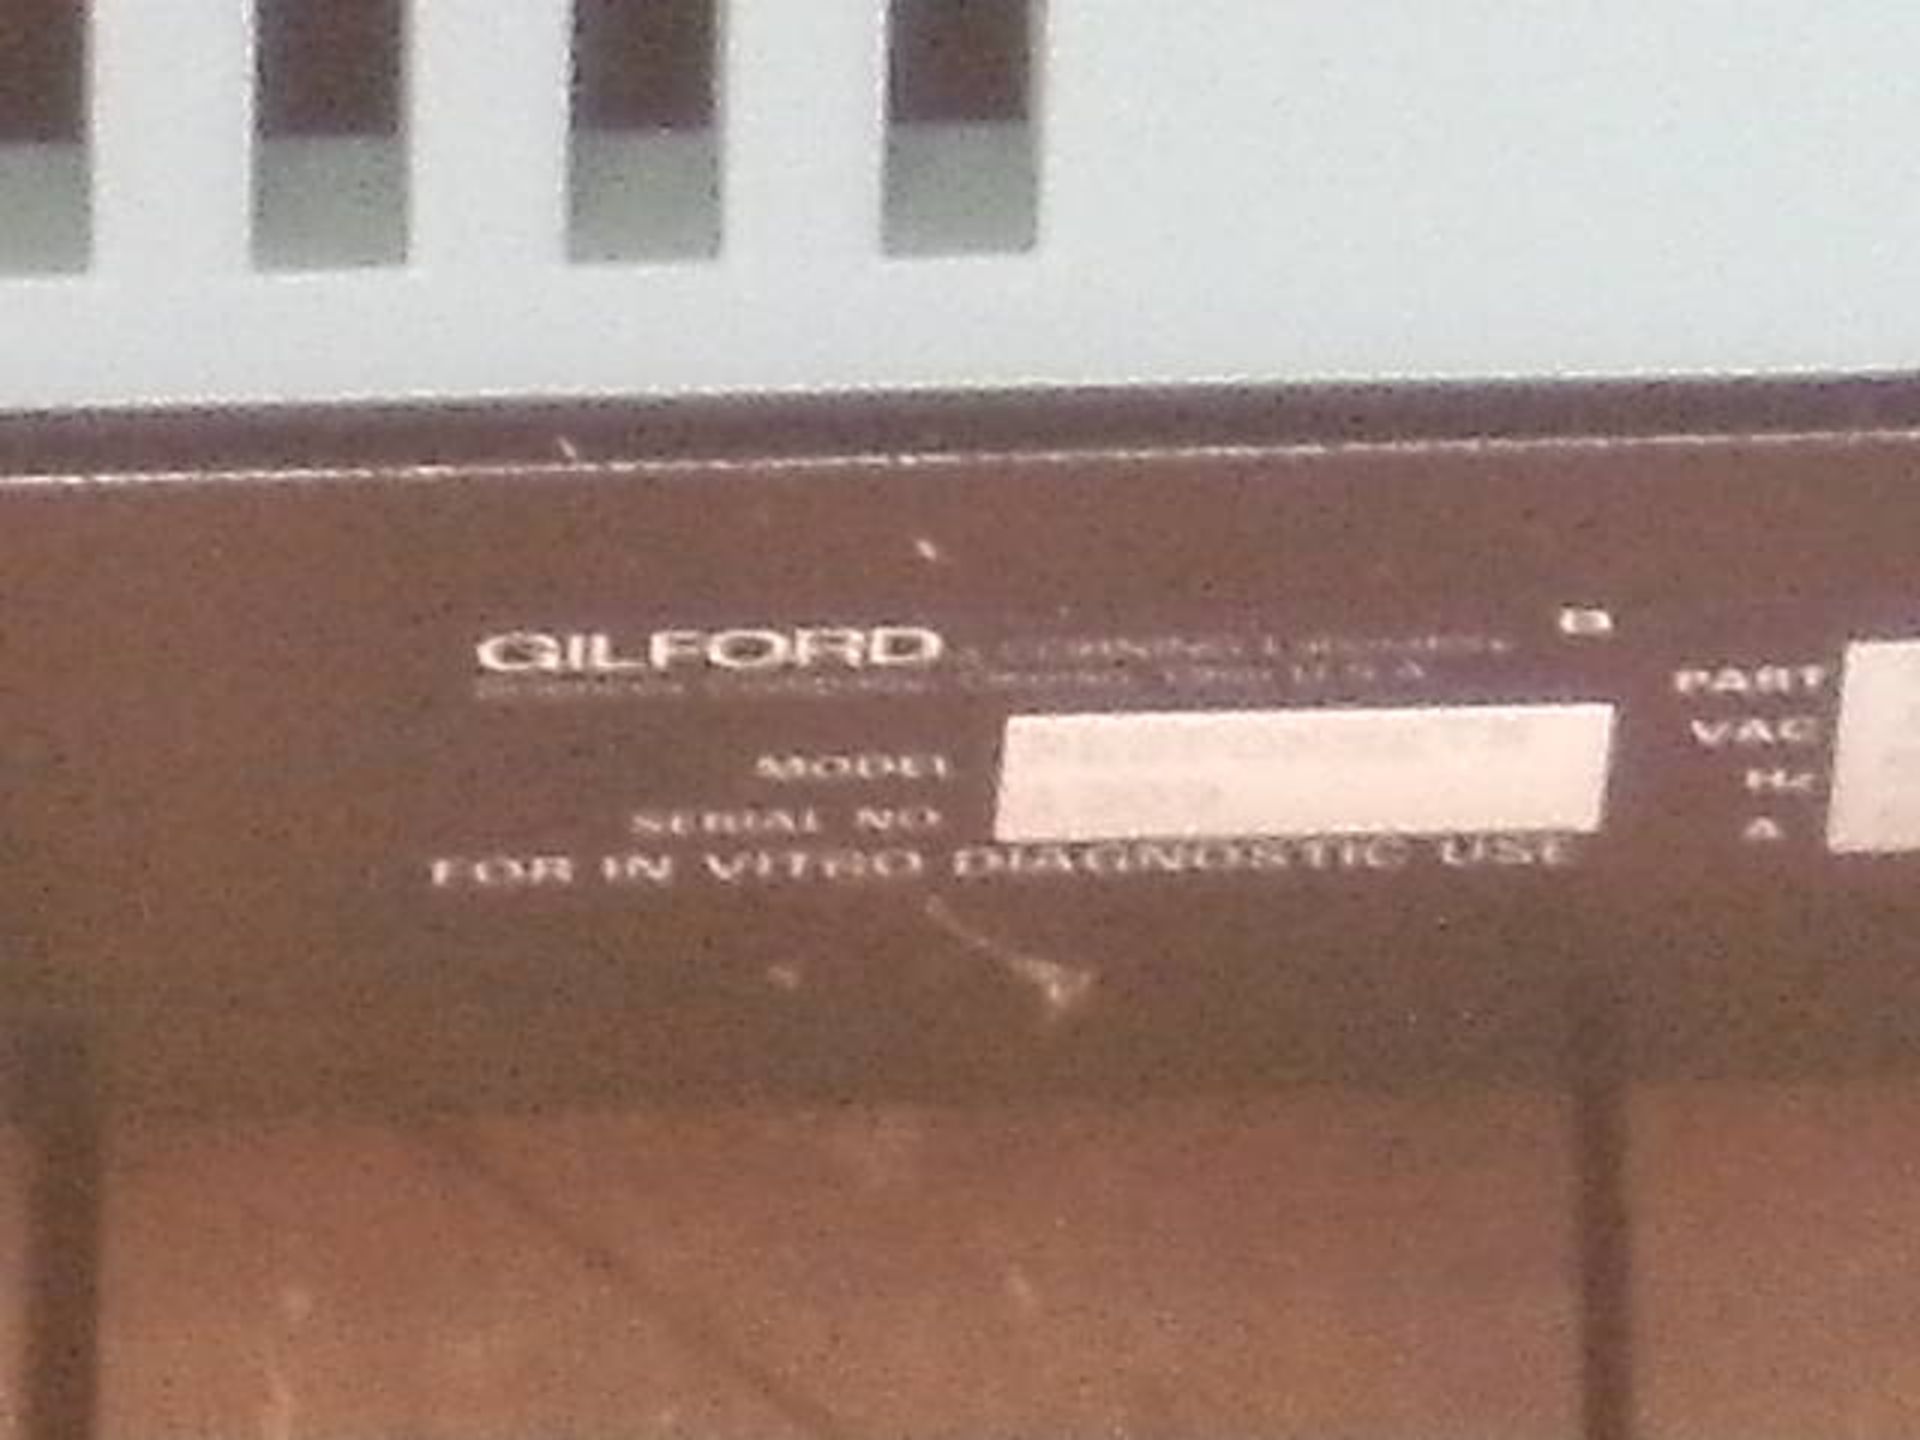 Gilford Instruments Response Spectrophotometer, Qty 1, 220930309178 - Image 5 of 6